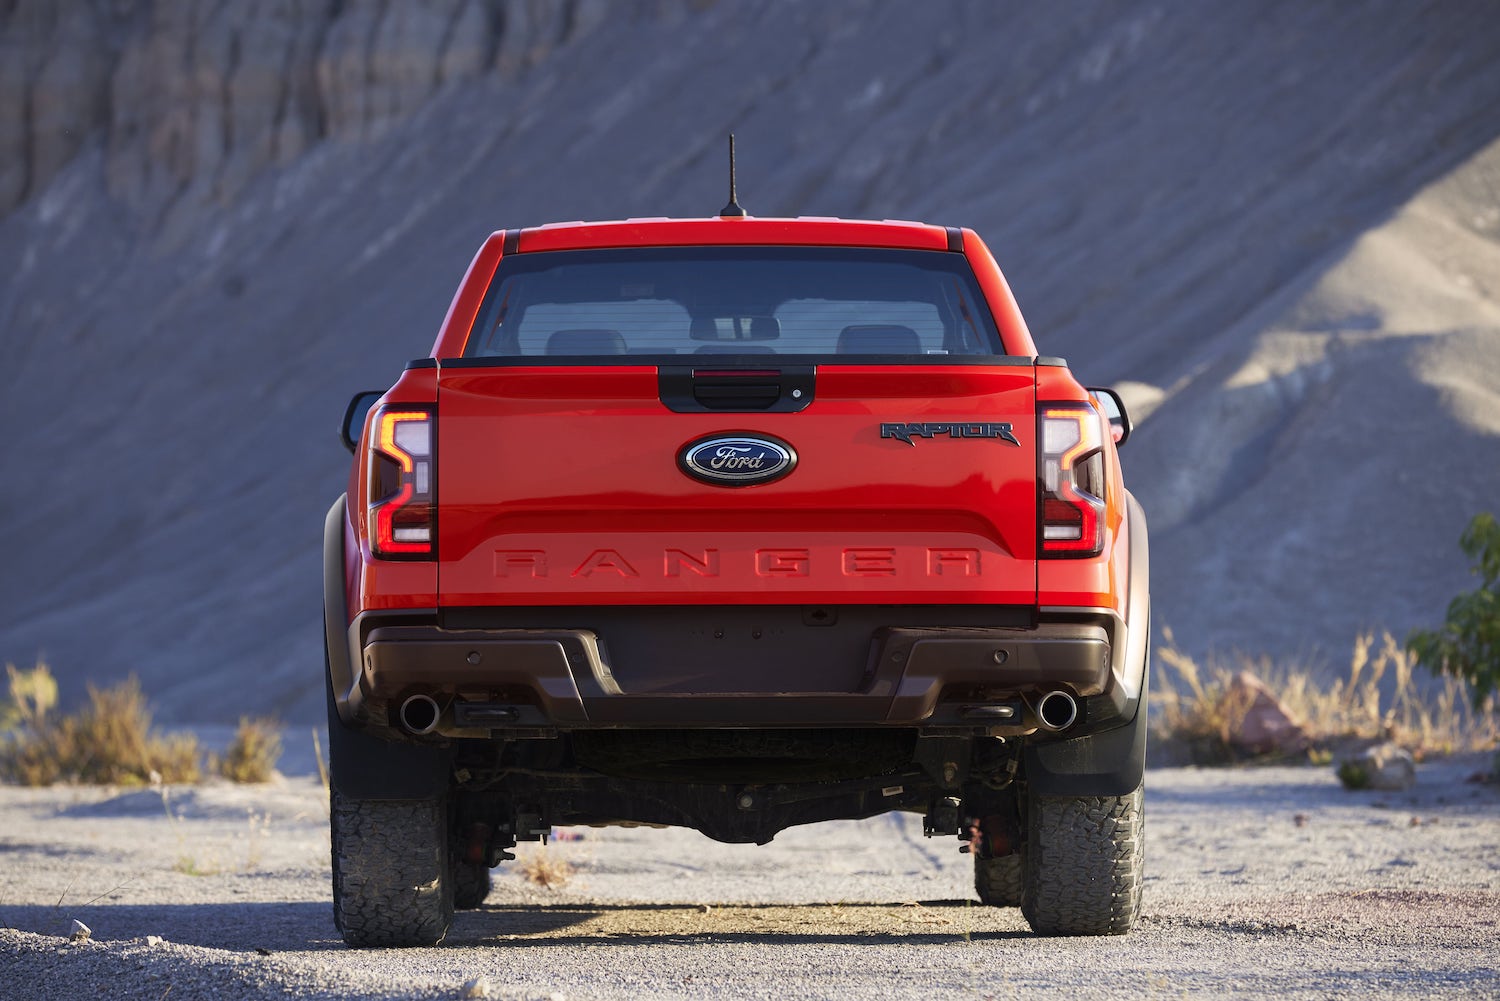 Ford reveals redesigned Ranger truck with new Raptor performance model